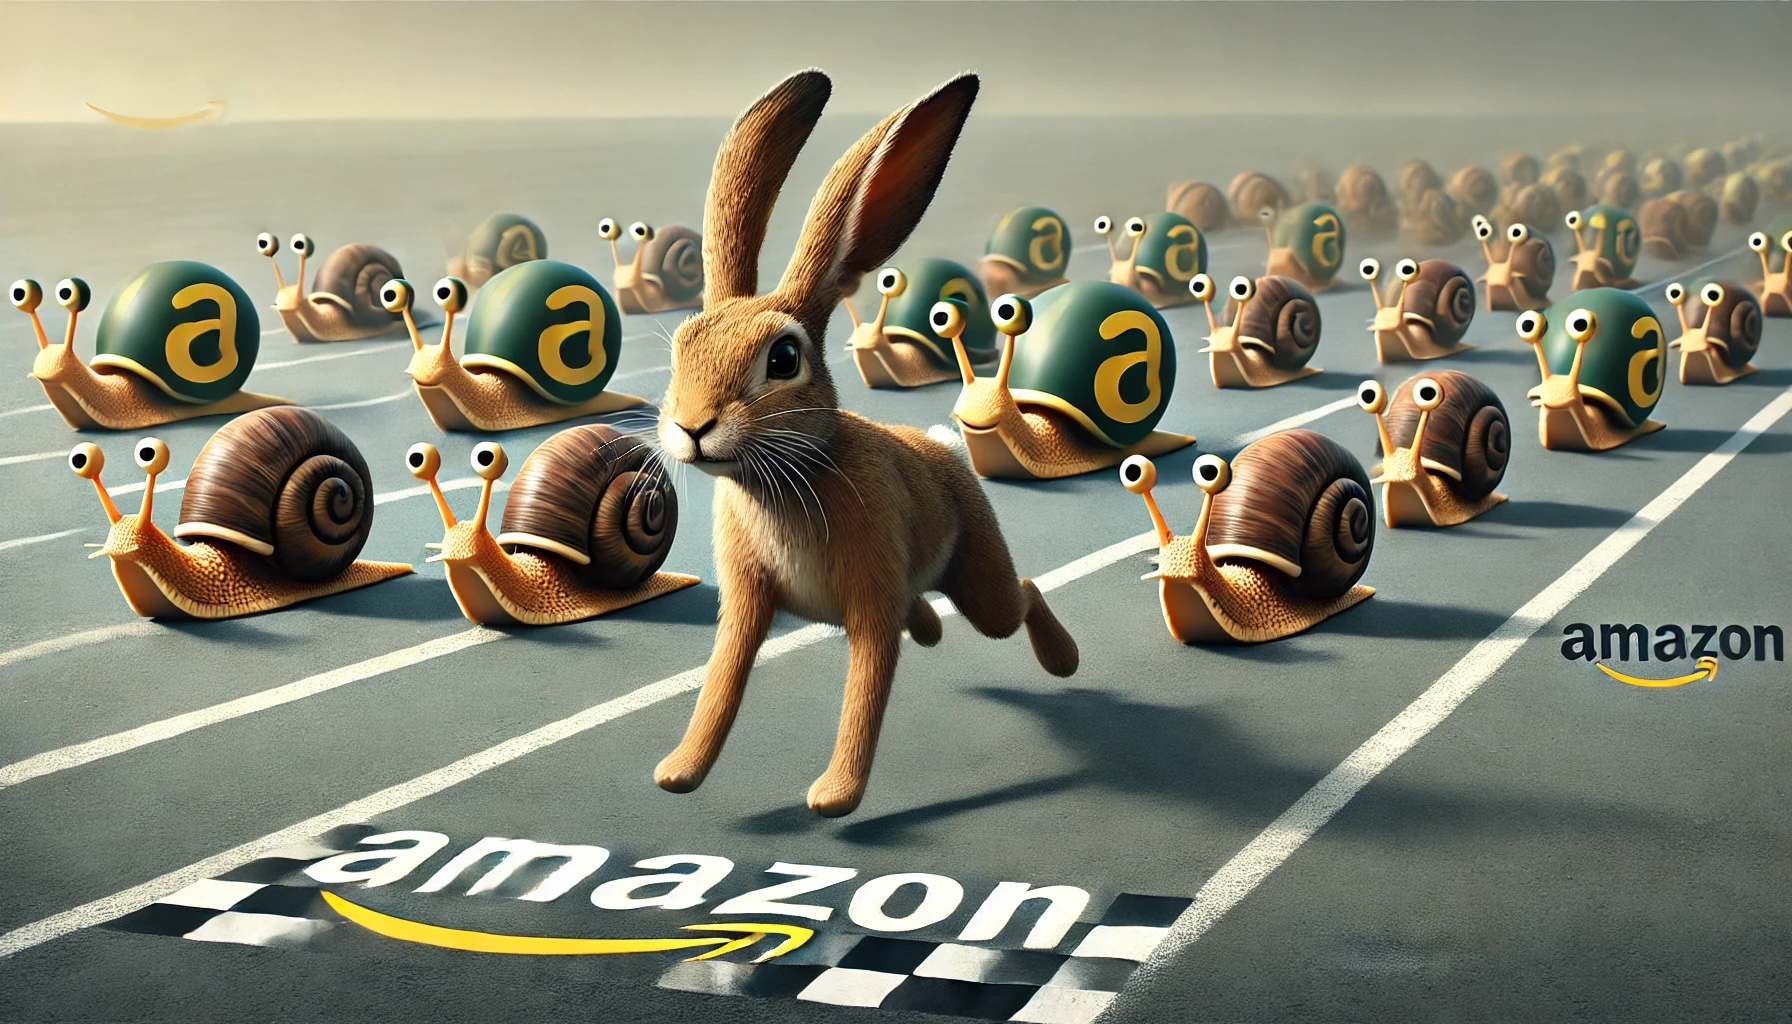 Amazon sellers represented by snails on a starting line, with one jackrabbit racing ahead of the snails.